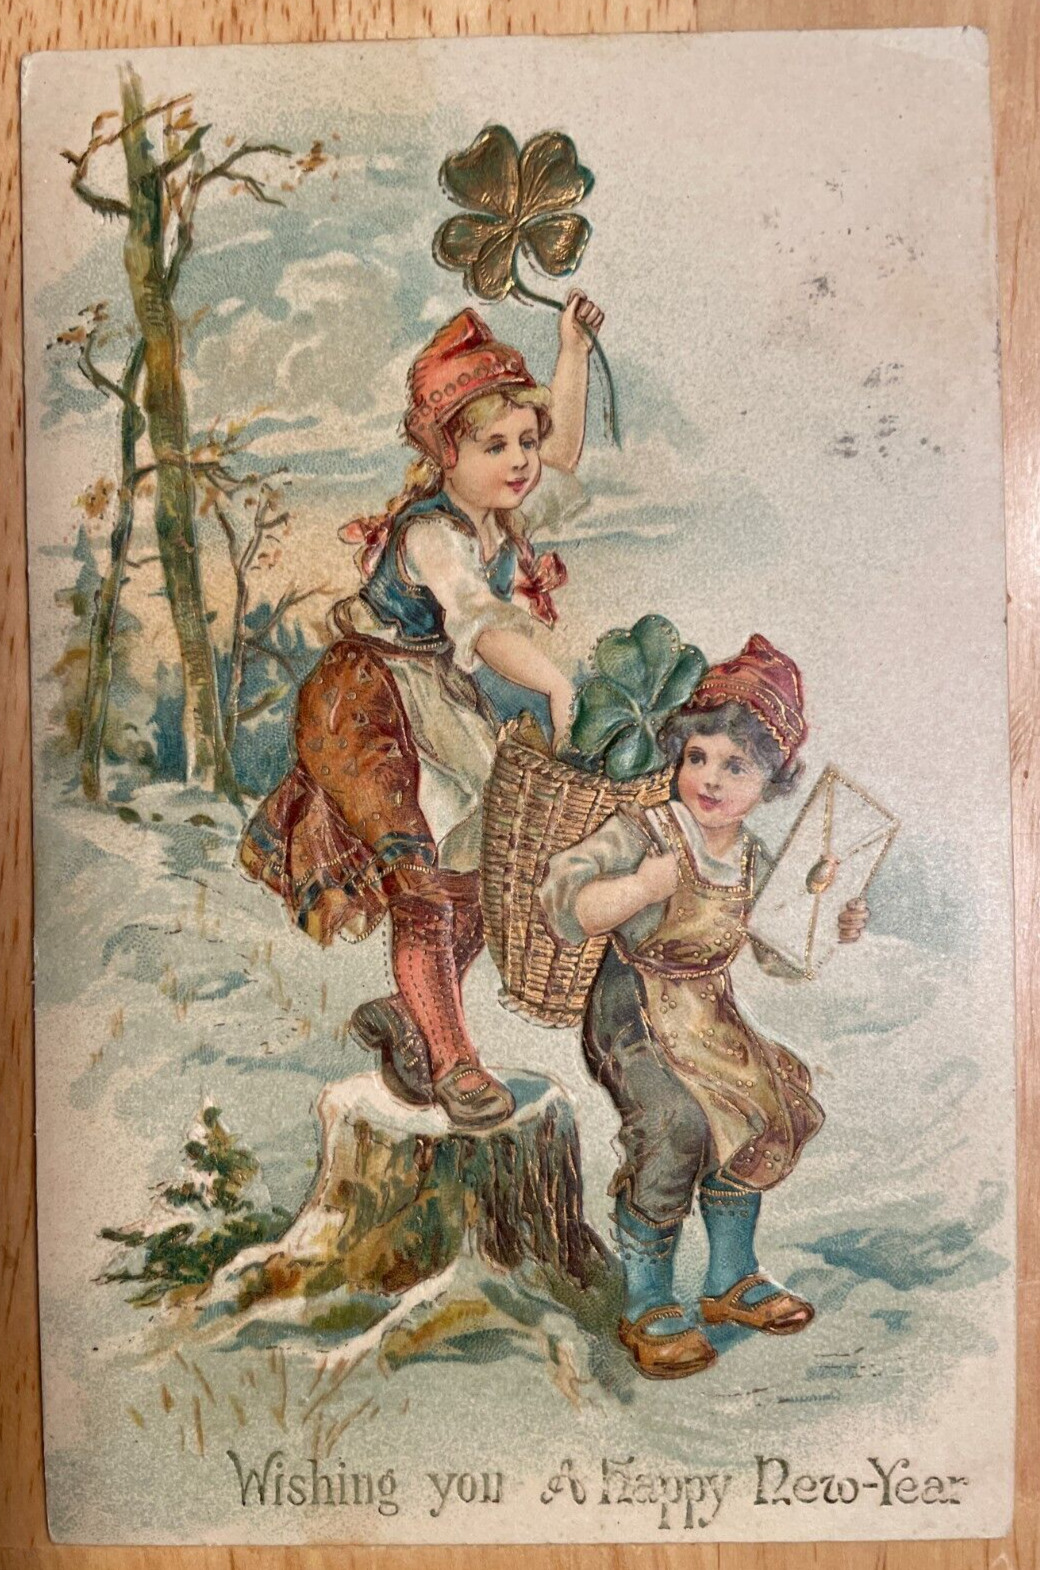 Vintage Victorian Postcard 1901-1910 Wishing You a Happy New Year - Kids in Wood